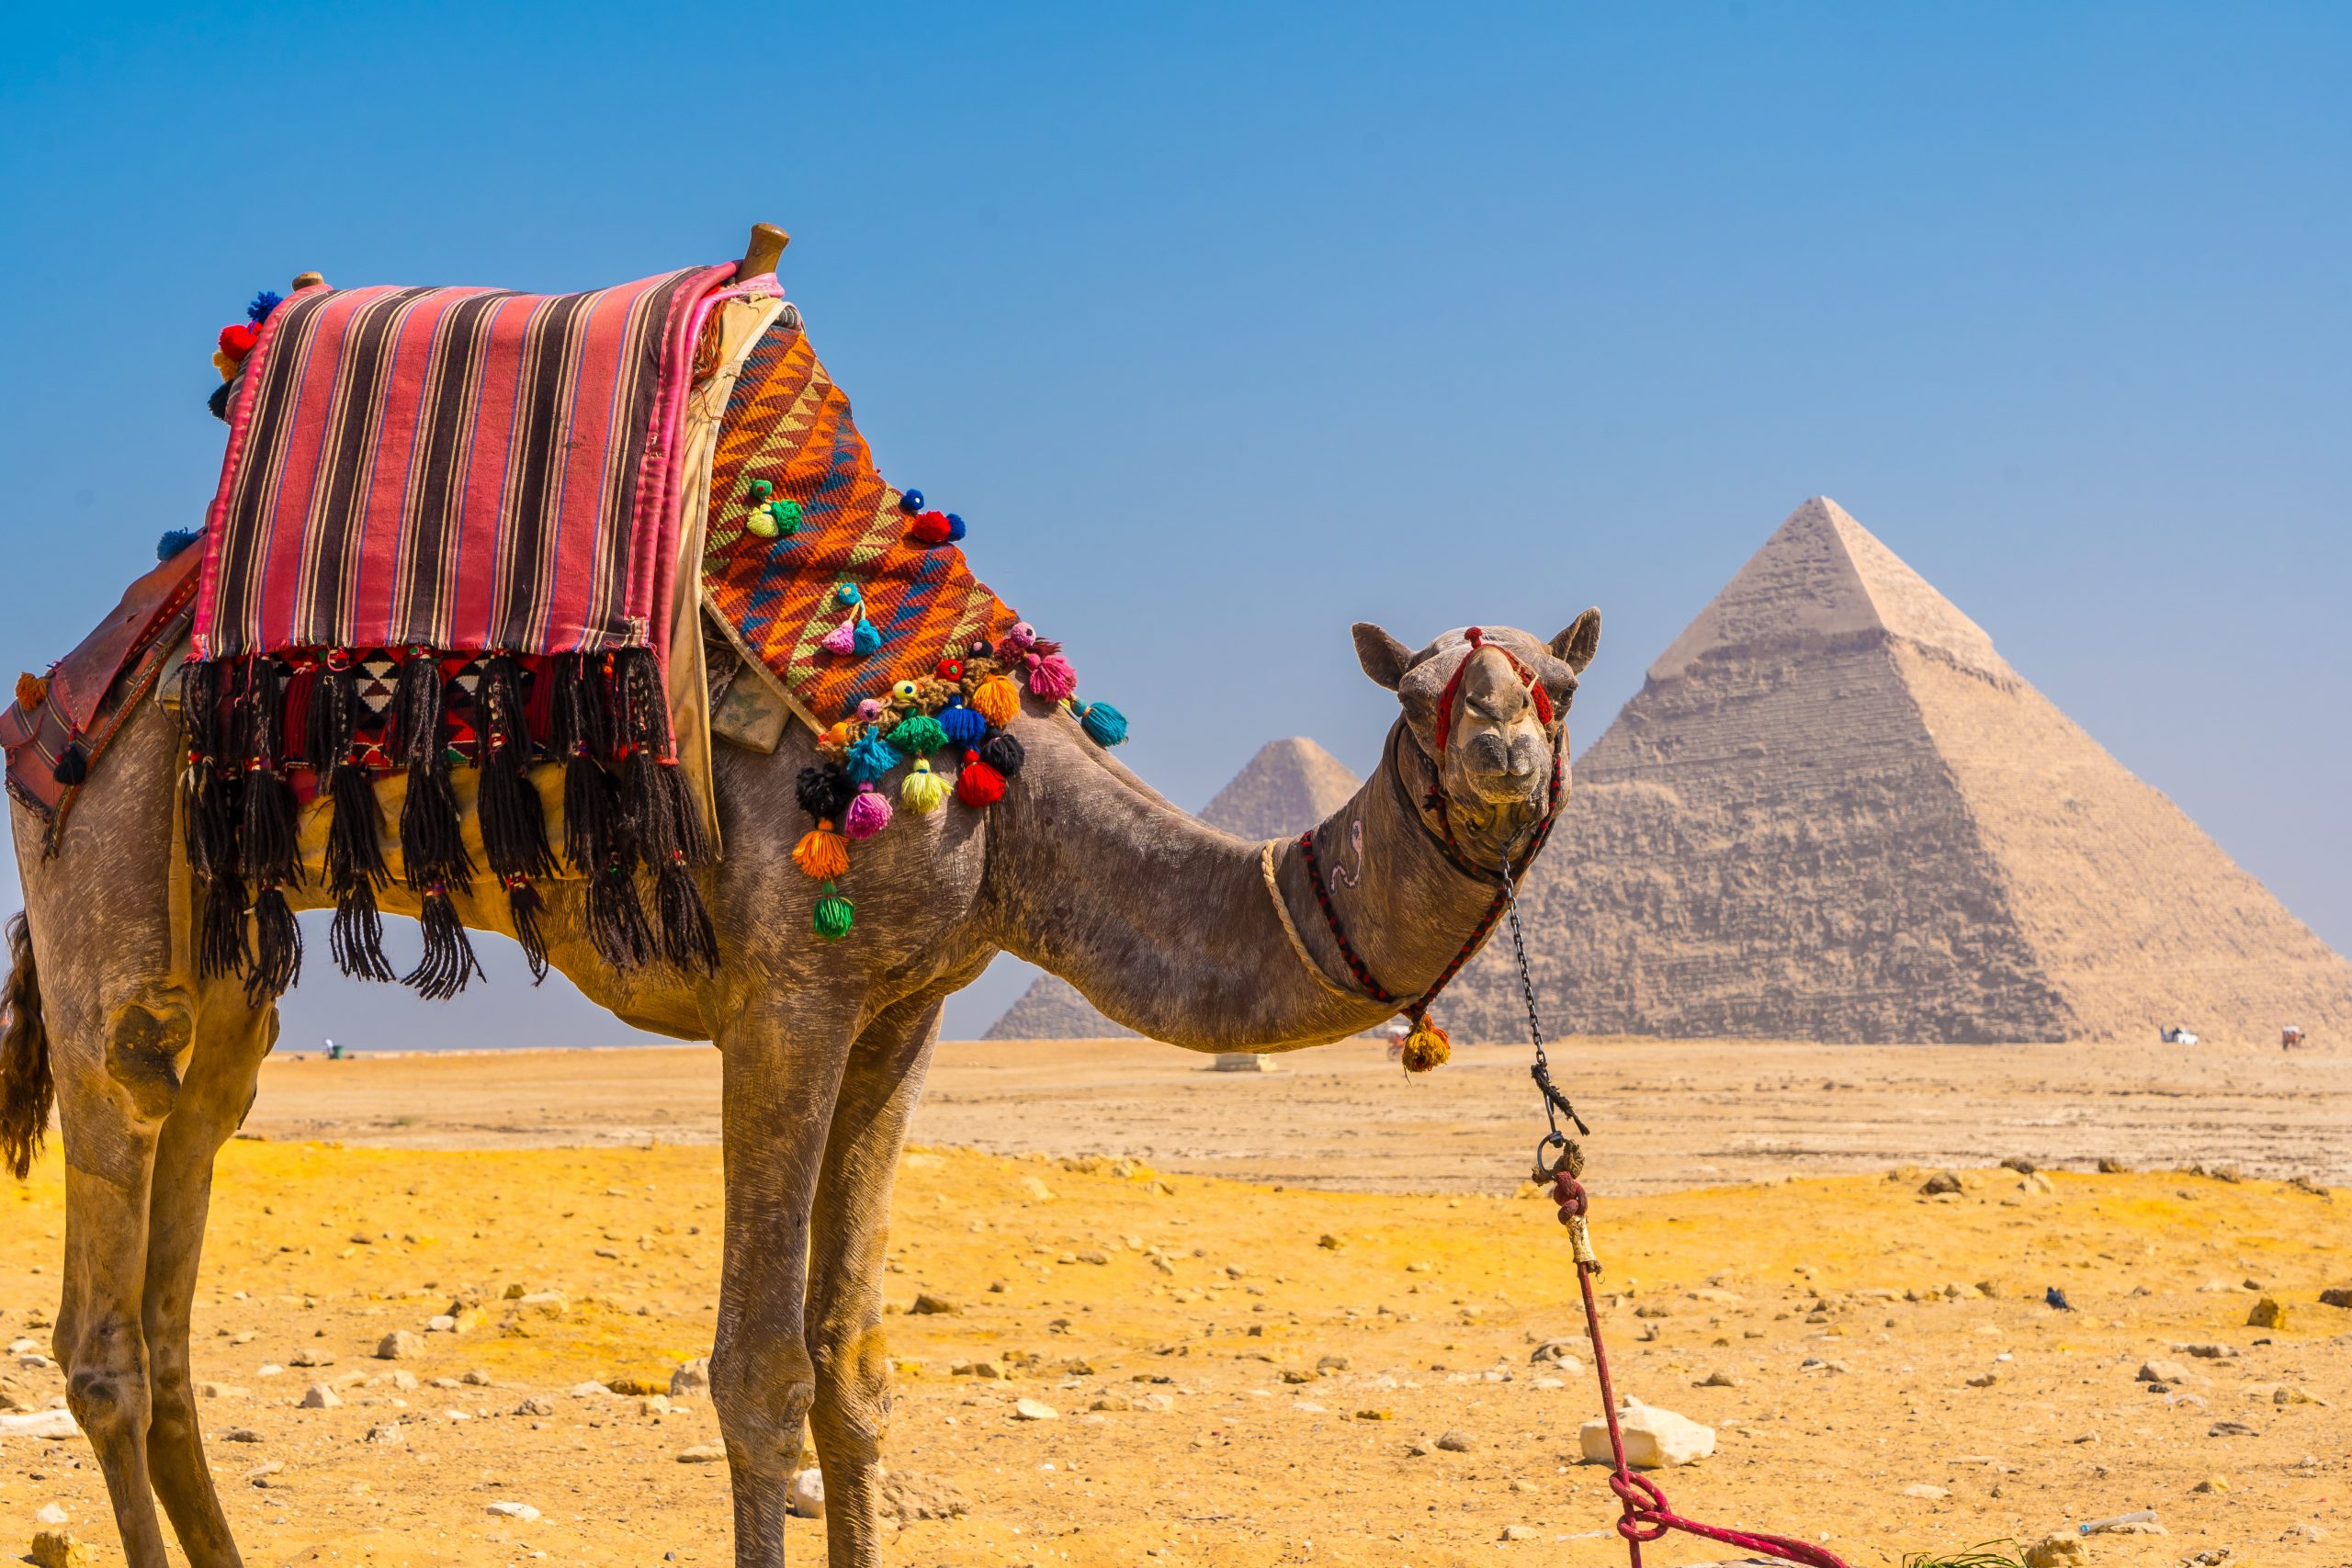 A beautiful camel in the Pyramids of Giza, the oldest Funerary monument in the world, Cairo, Egypt